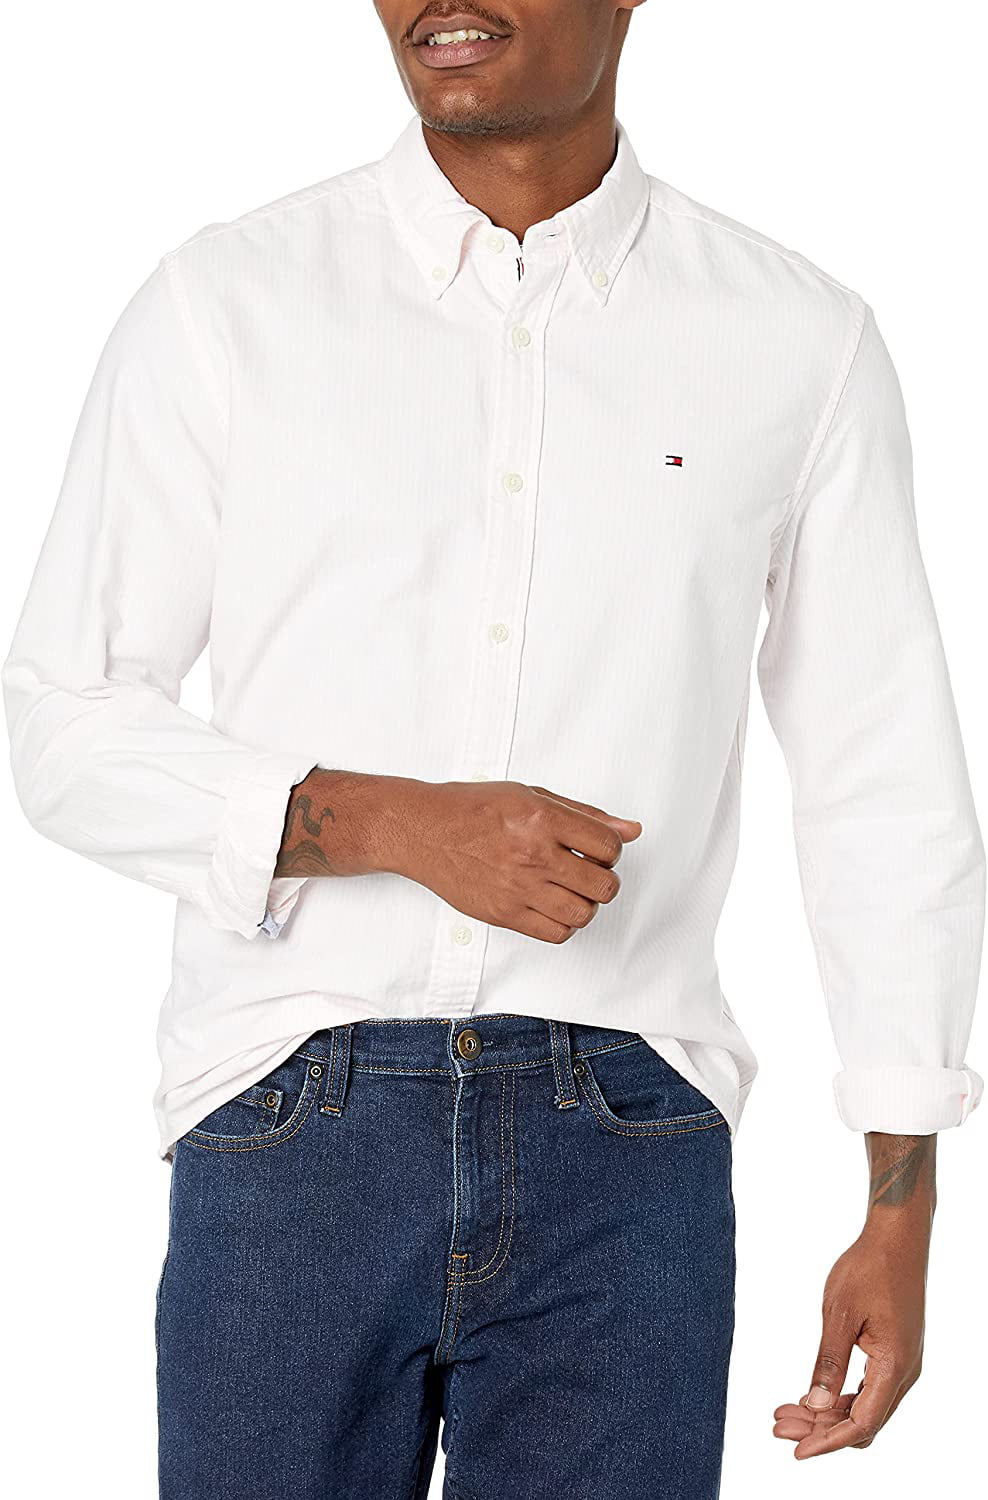 Tommy Hilfiger Men Custom Fit Long Sleeve Button-Down Casual Shirt $0 Free Ship 